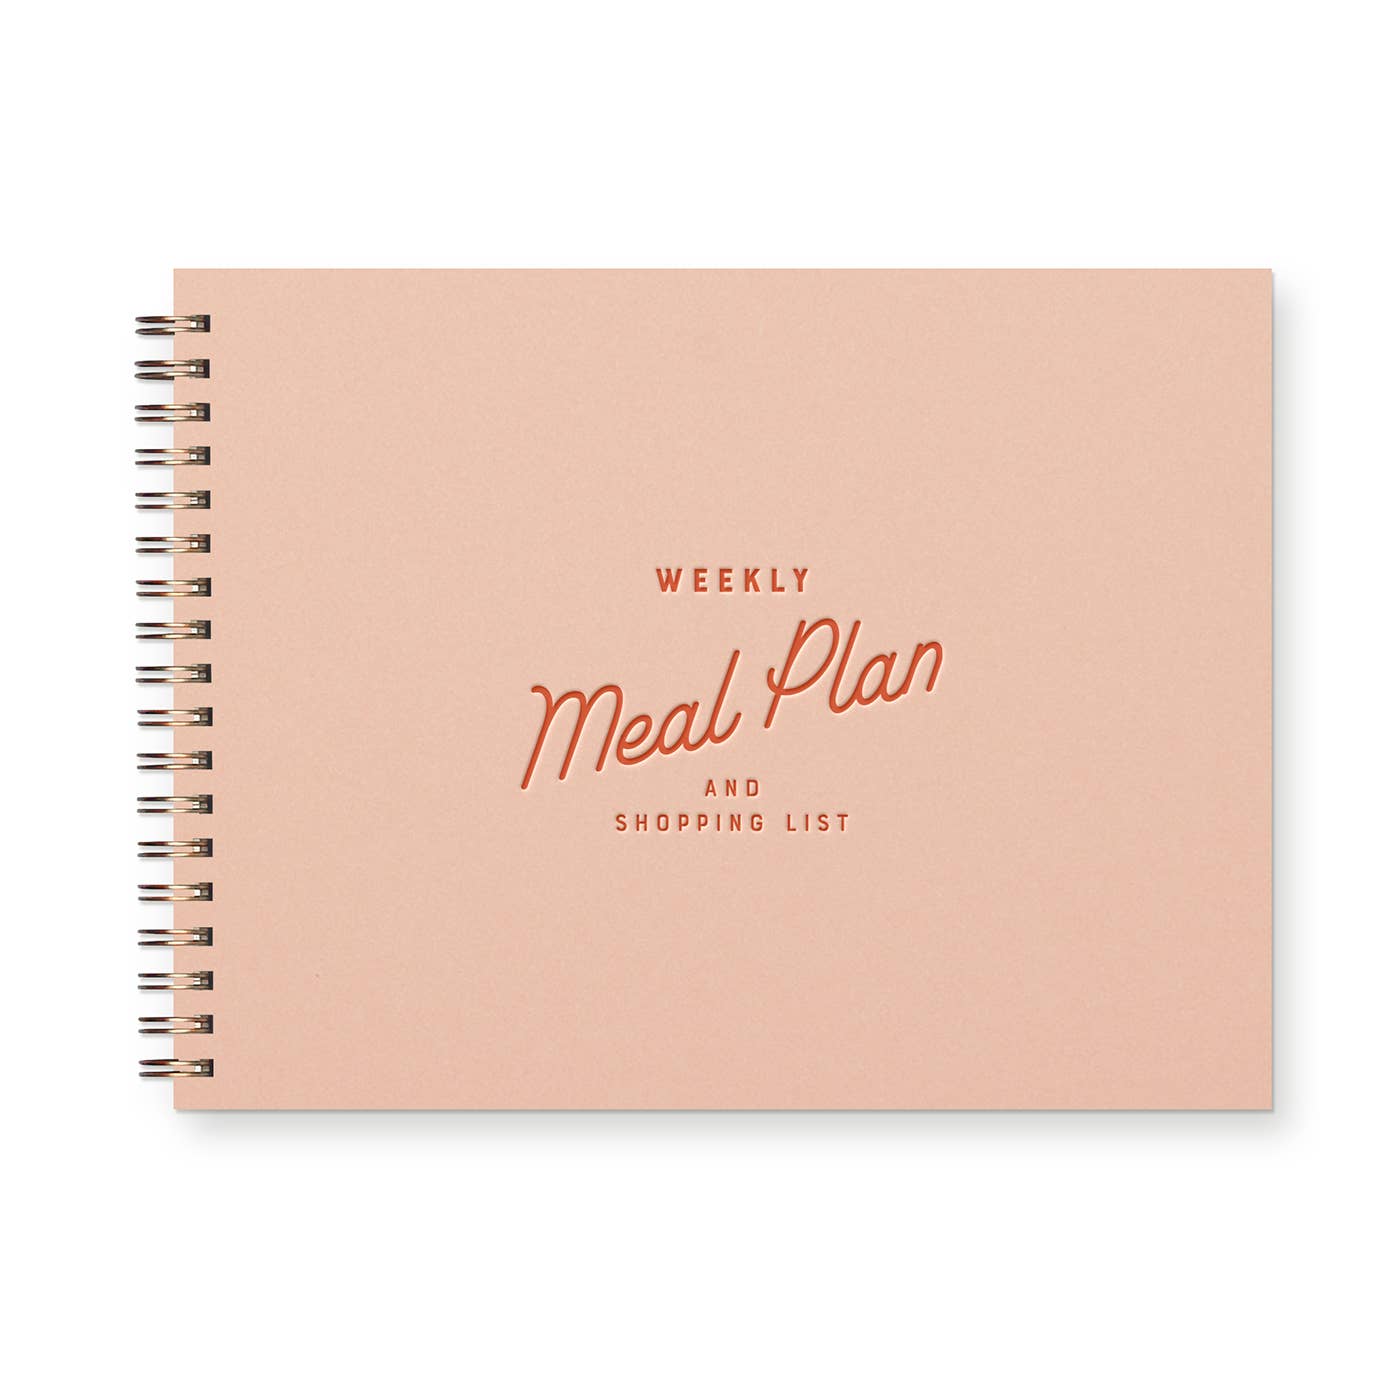 Retro Weekly Meal Planner Blush